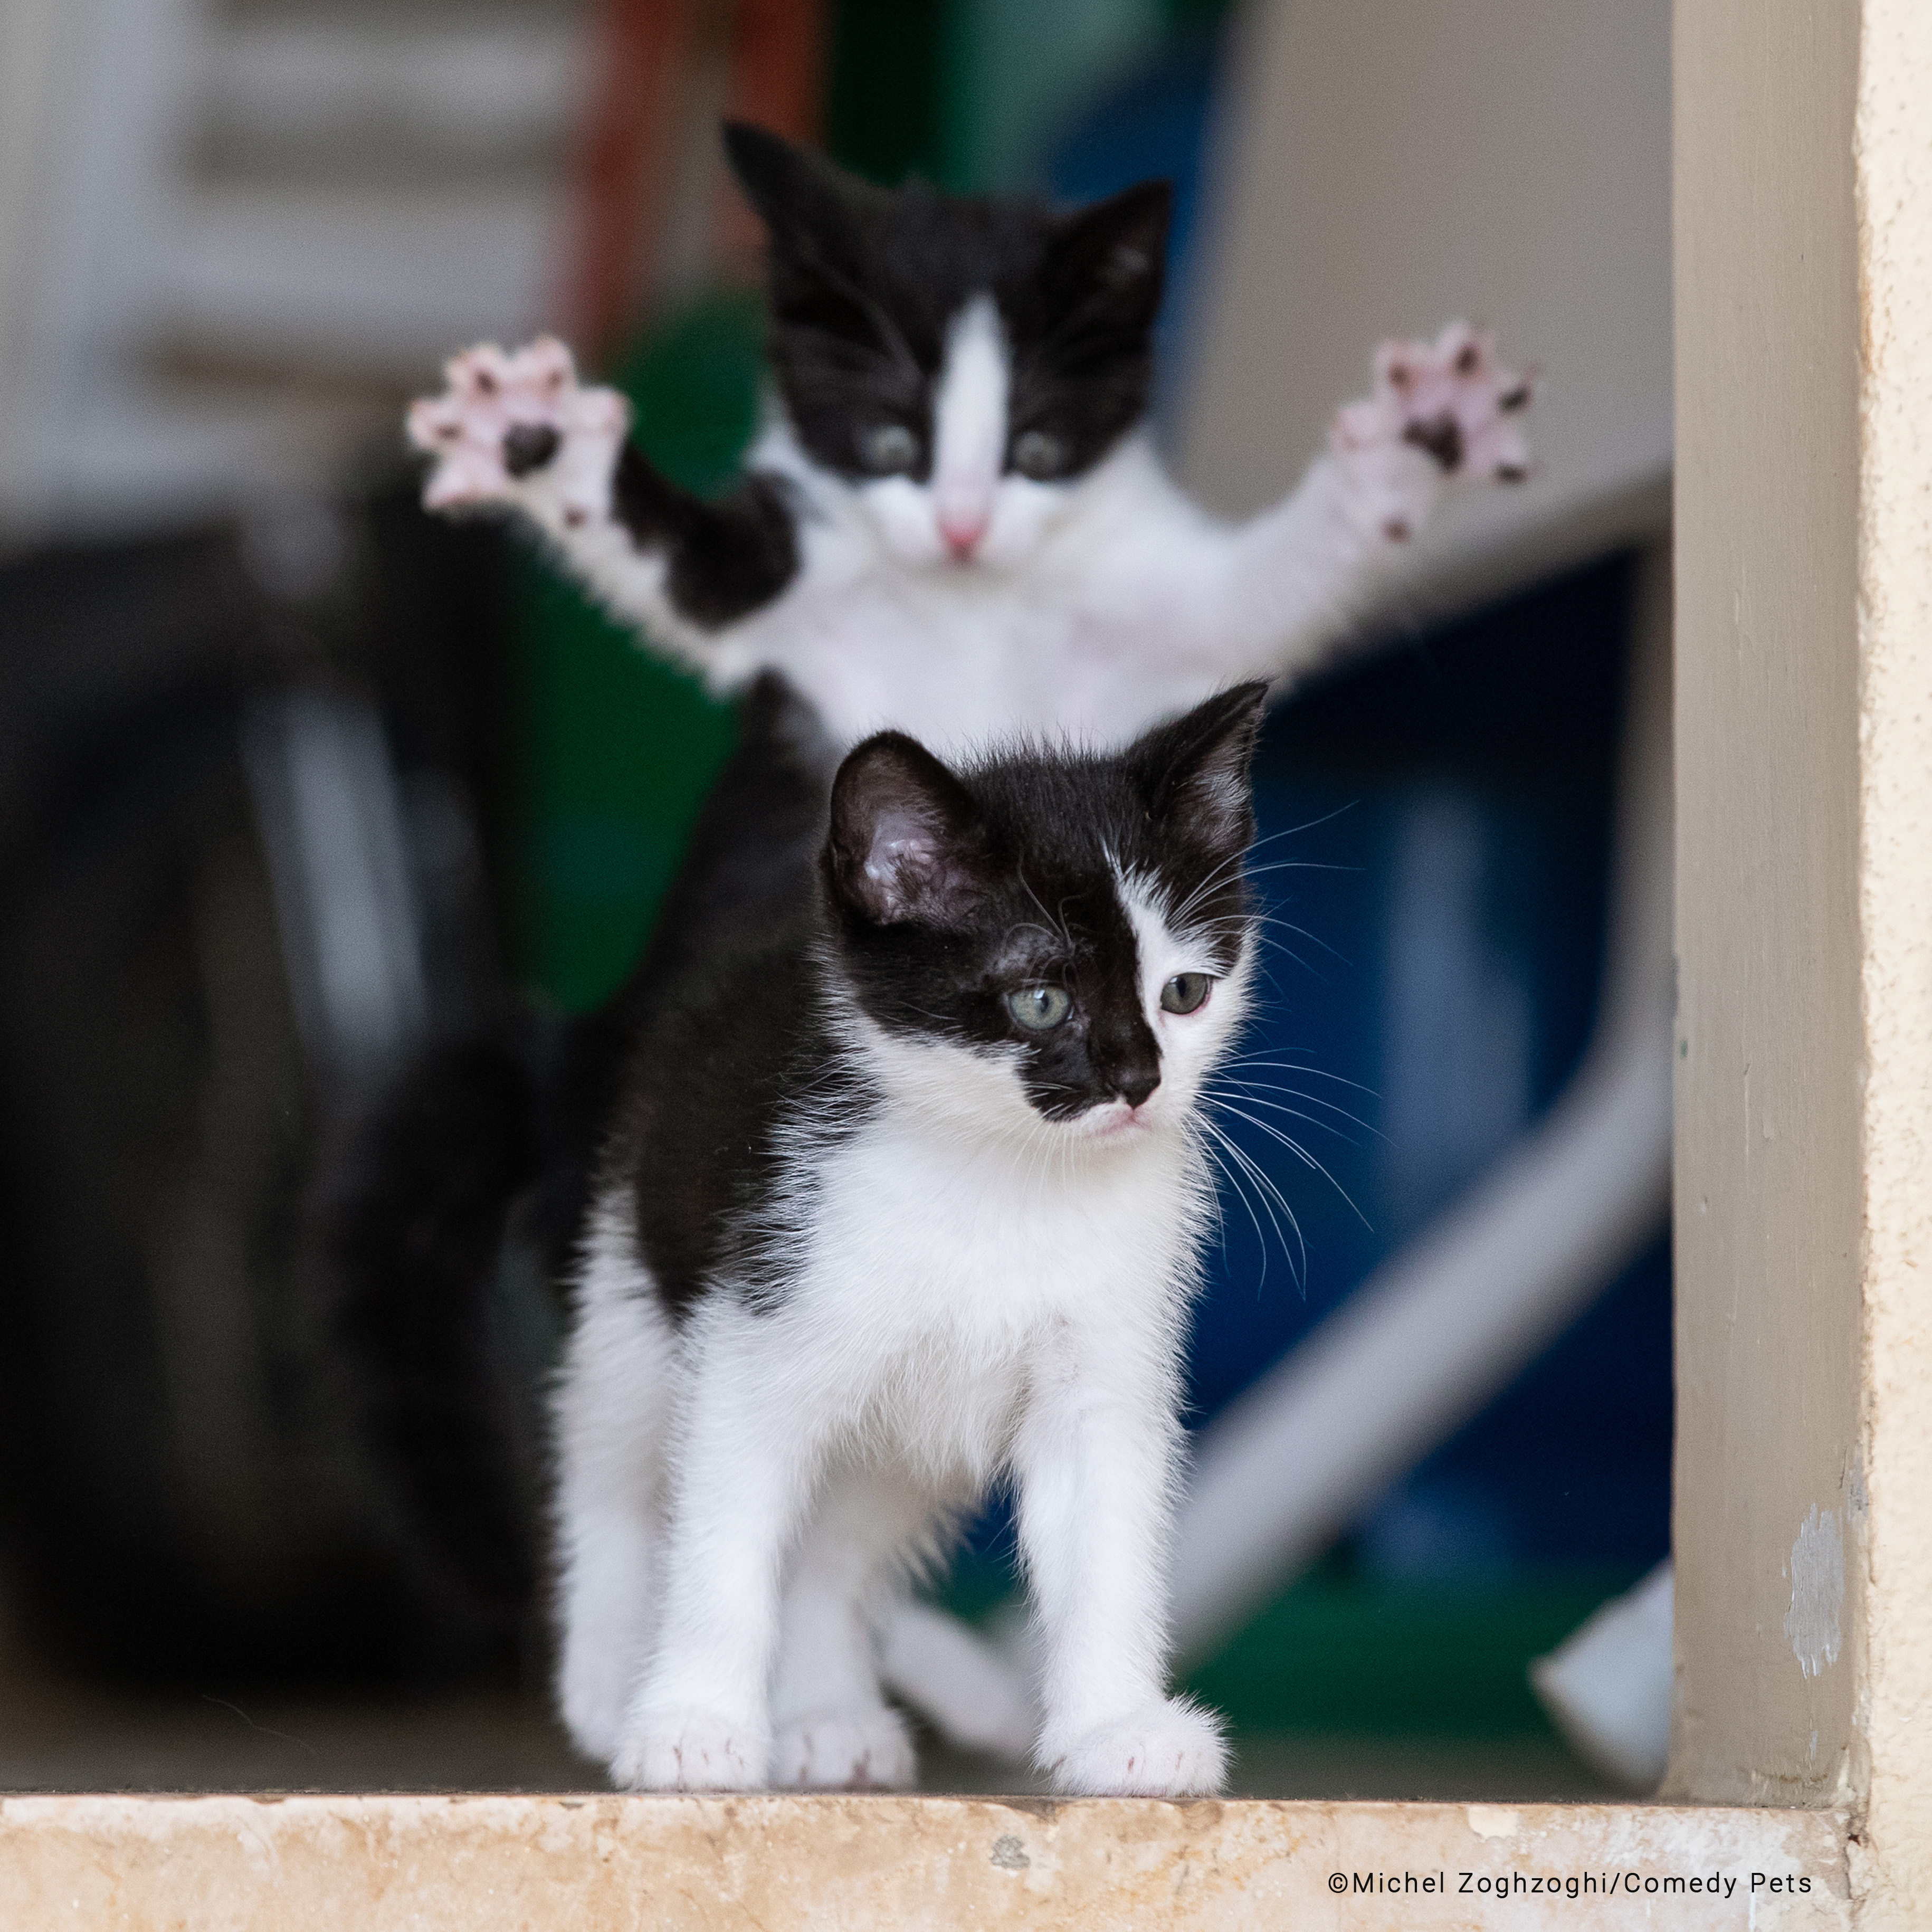 Two black and white kittens with one sneaking up behind the other